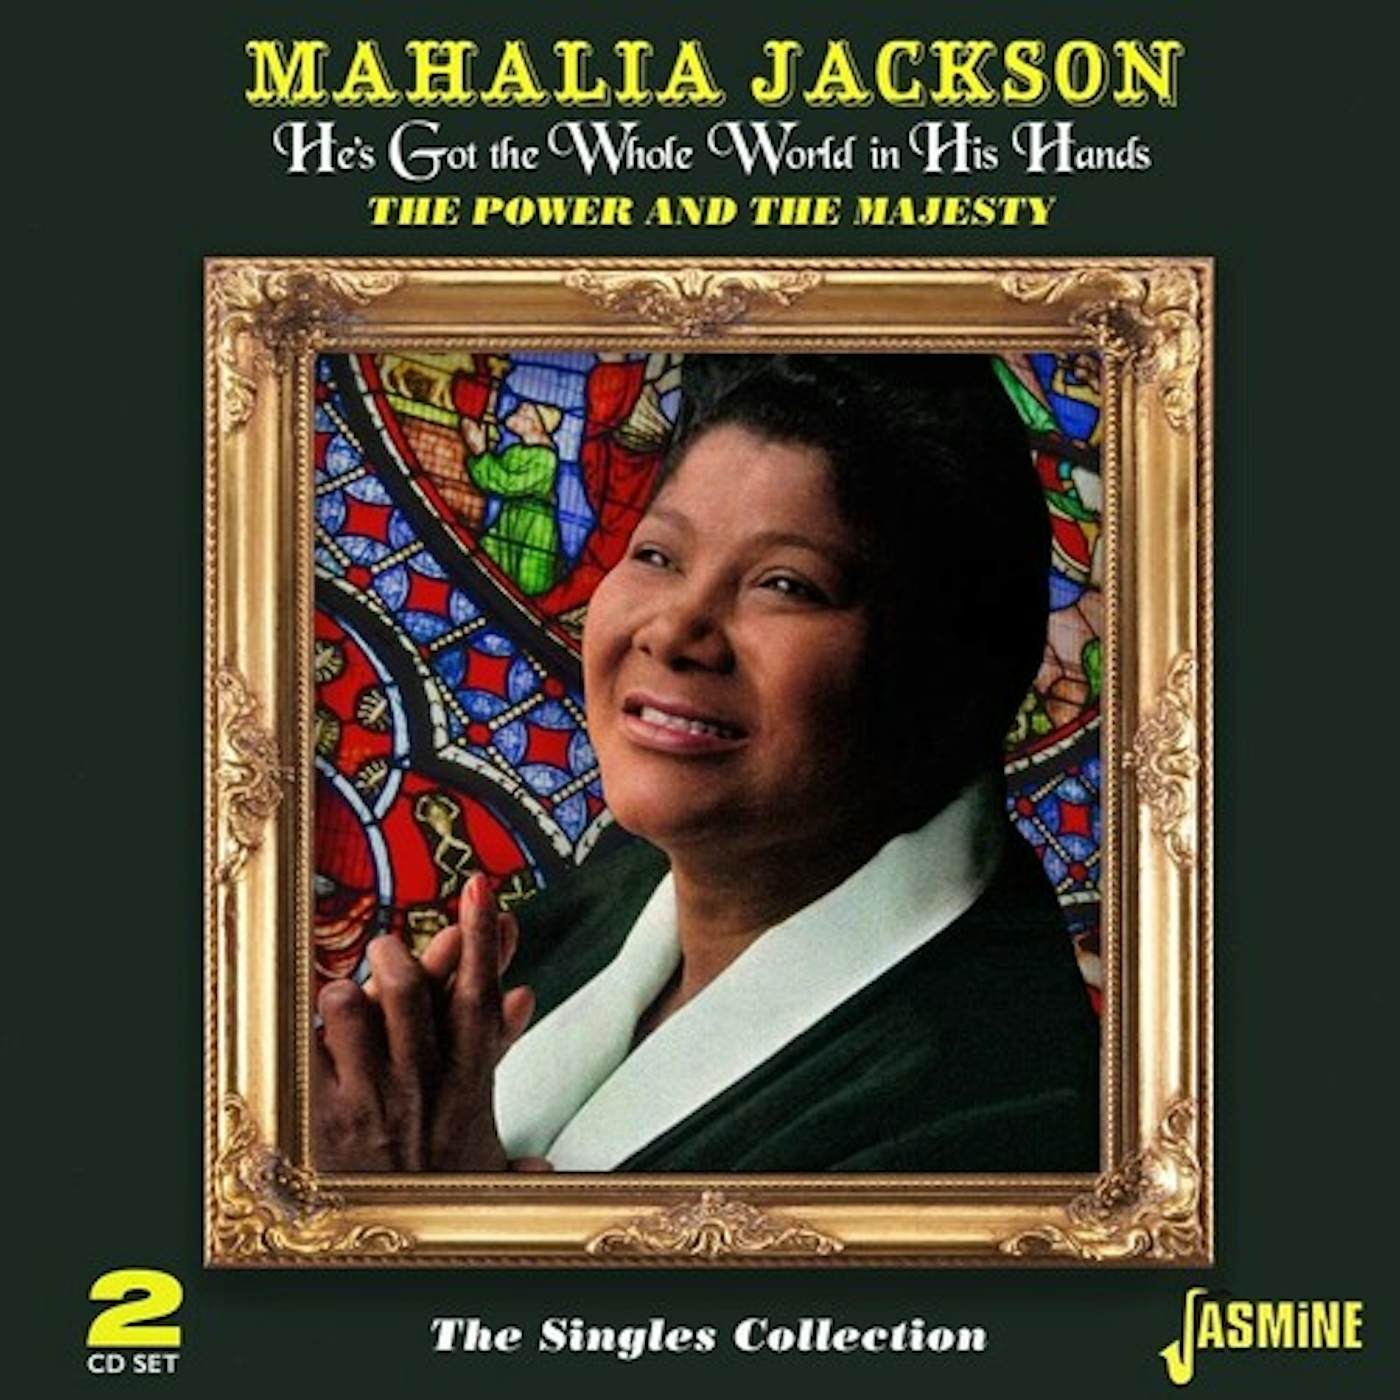 Mahalia Jackson HE'S GOT THE WHOLE WORLD IN HIS HANDS: POWER & THE CD